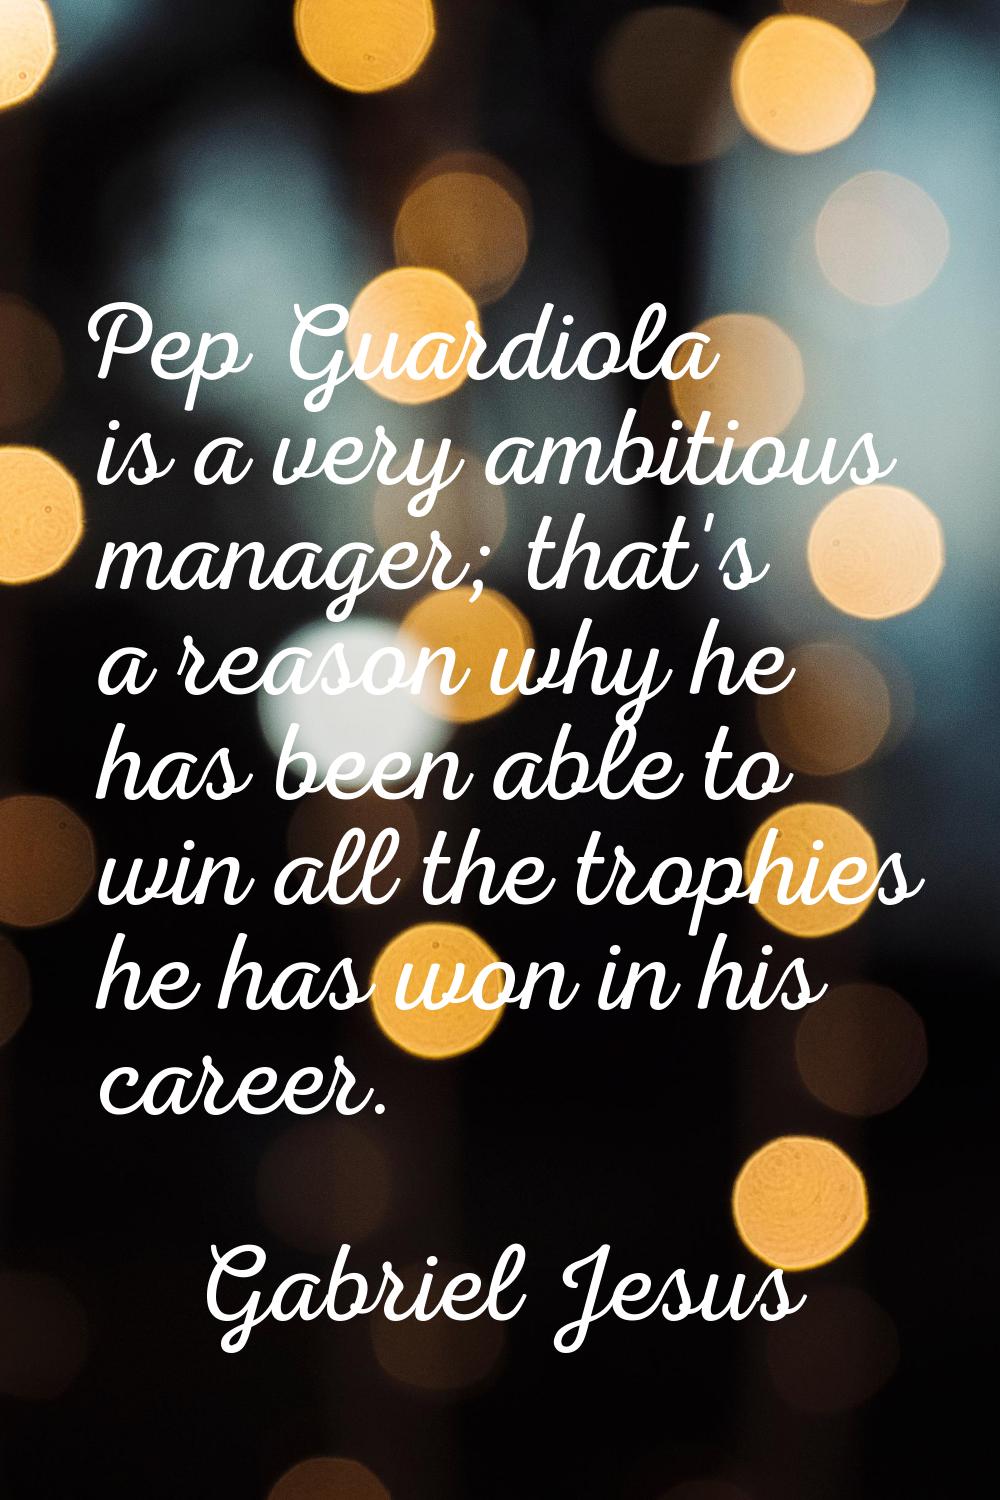 Pep Guardiola is a very ambitious manager; that's a reason why he has been able to win all the trop